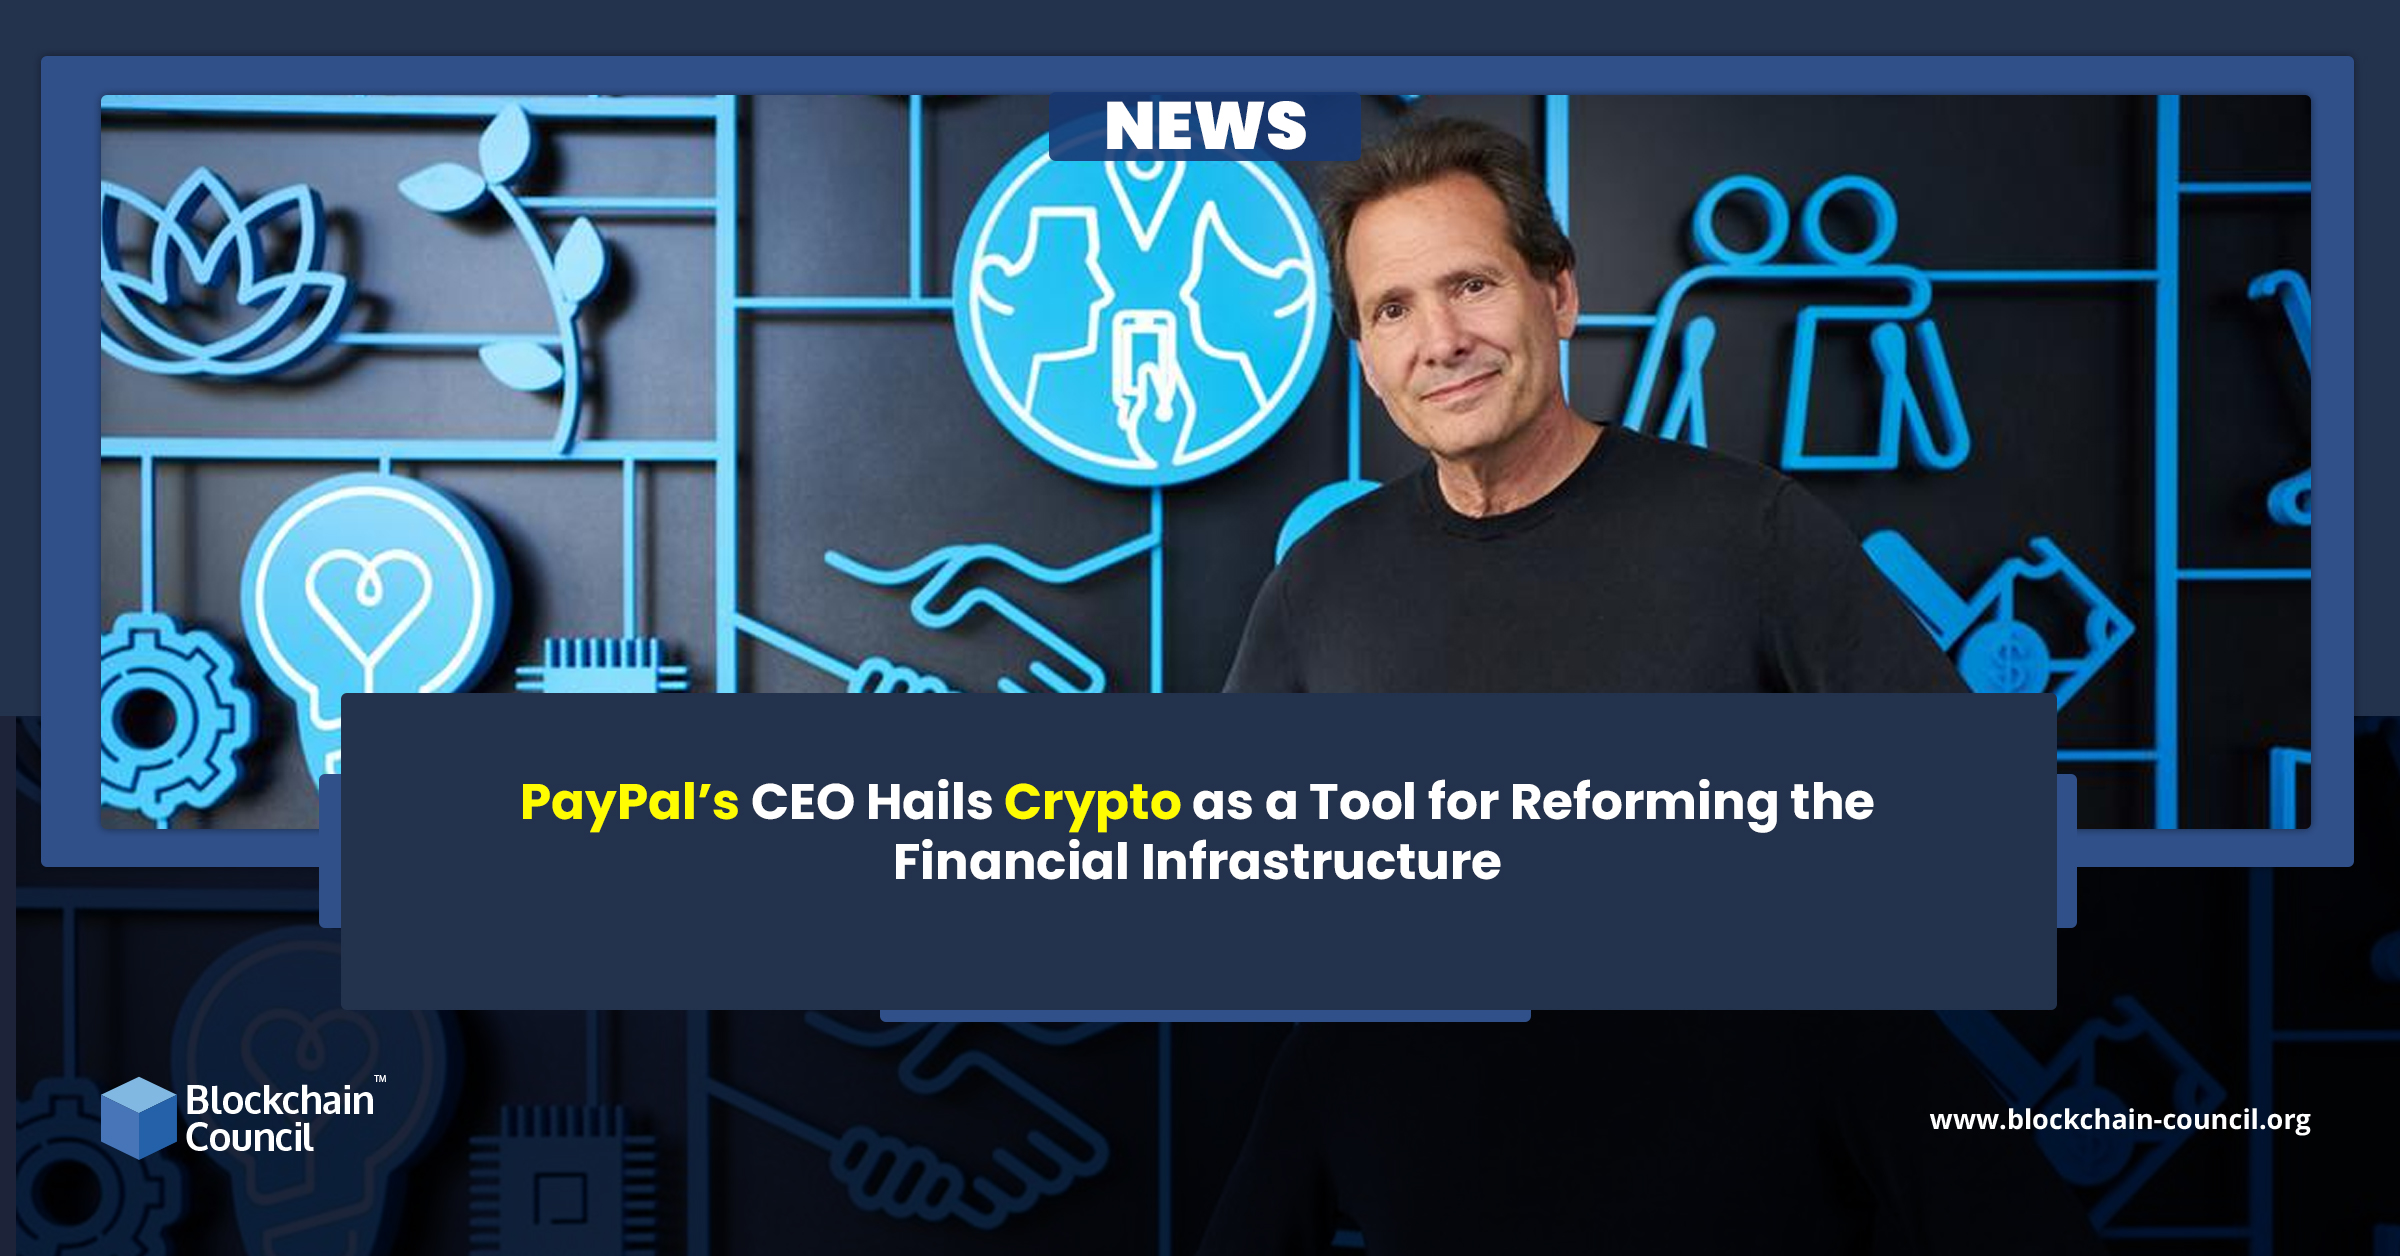 PayPal’s CEO Hails Crypto as a Tool for Reforming the Financial Infrastructure